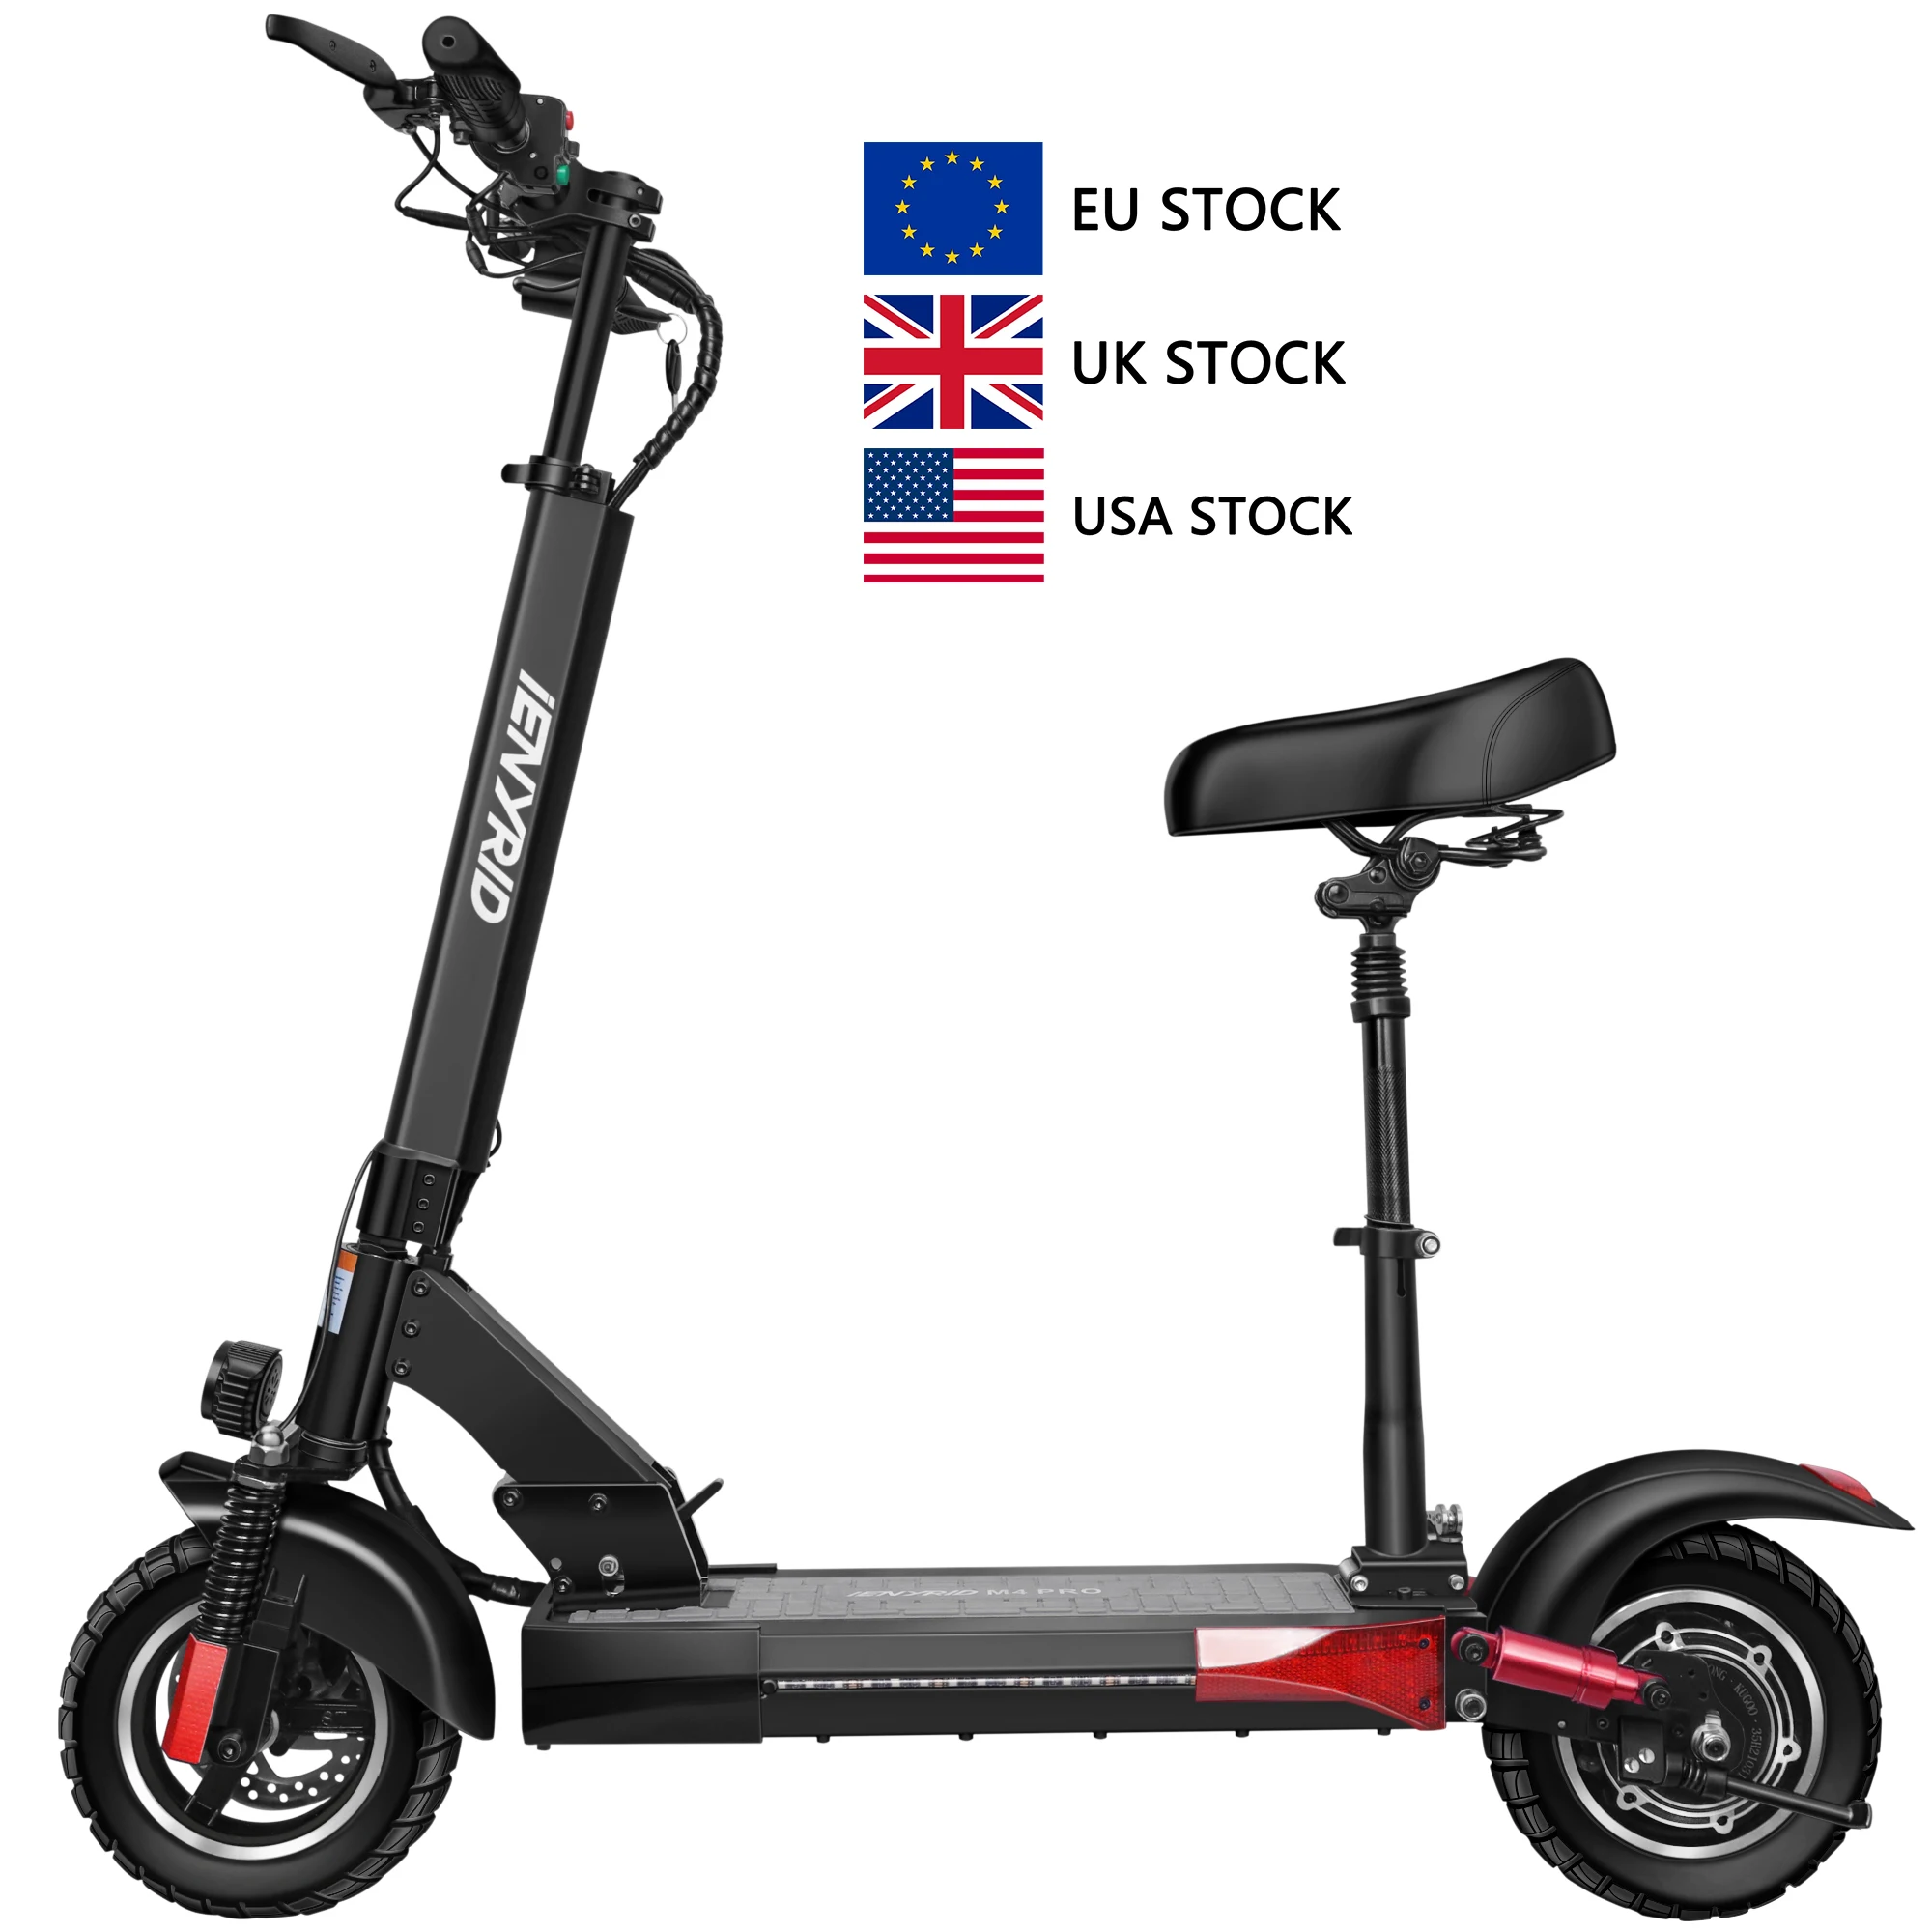 

iENYRID M4 PRO FCC ROHS CE 16ah 10" Off-road Tires with EU warehouse Drop shipping Folding Electric Scooter